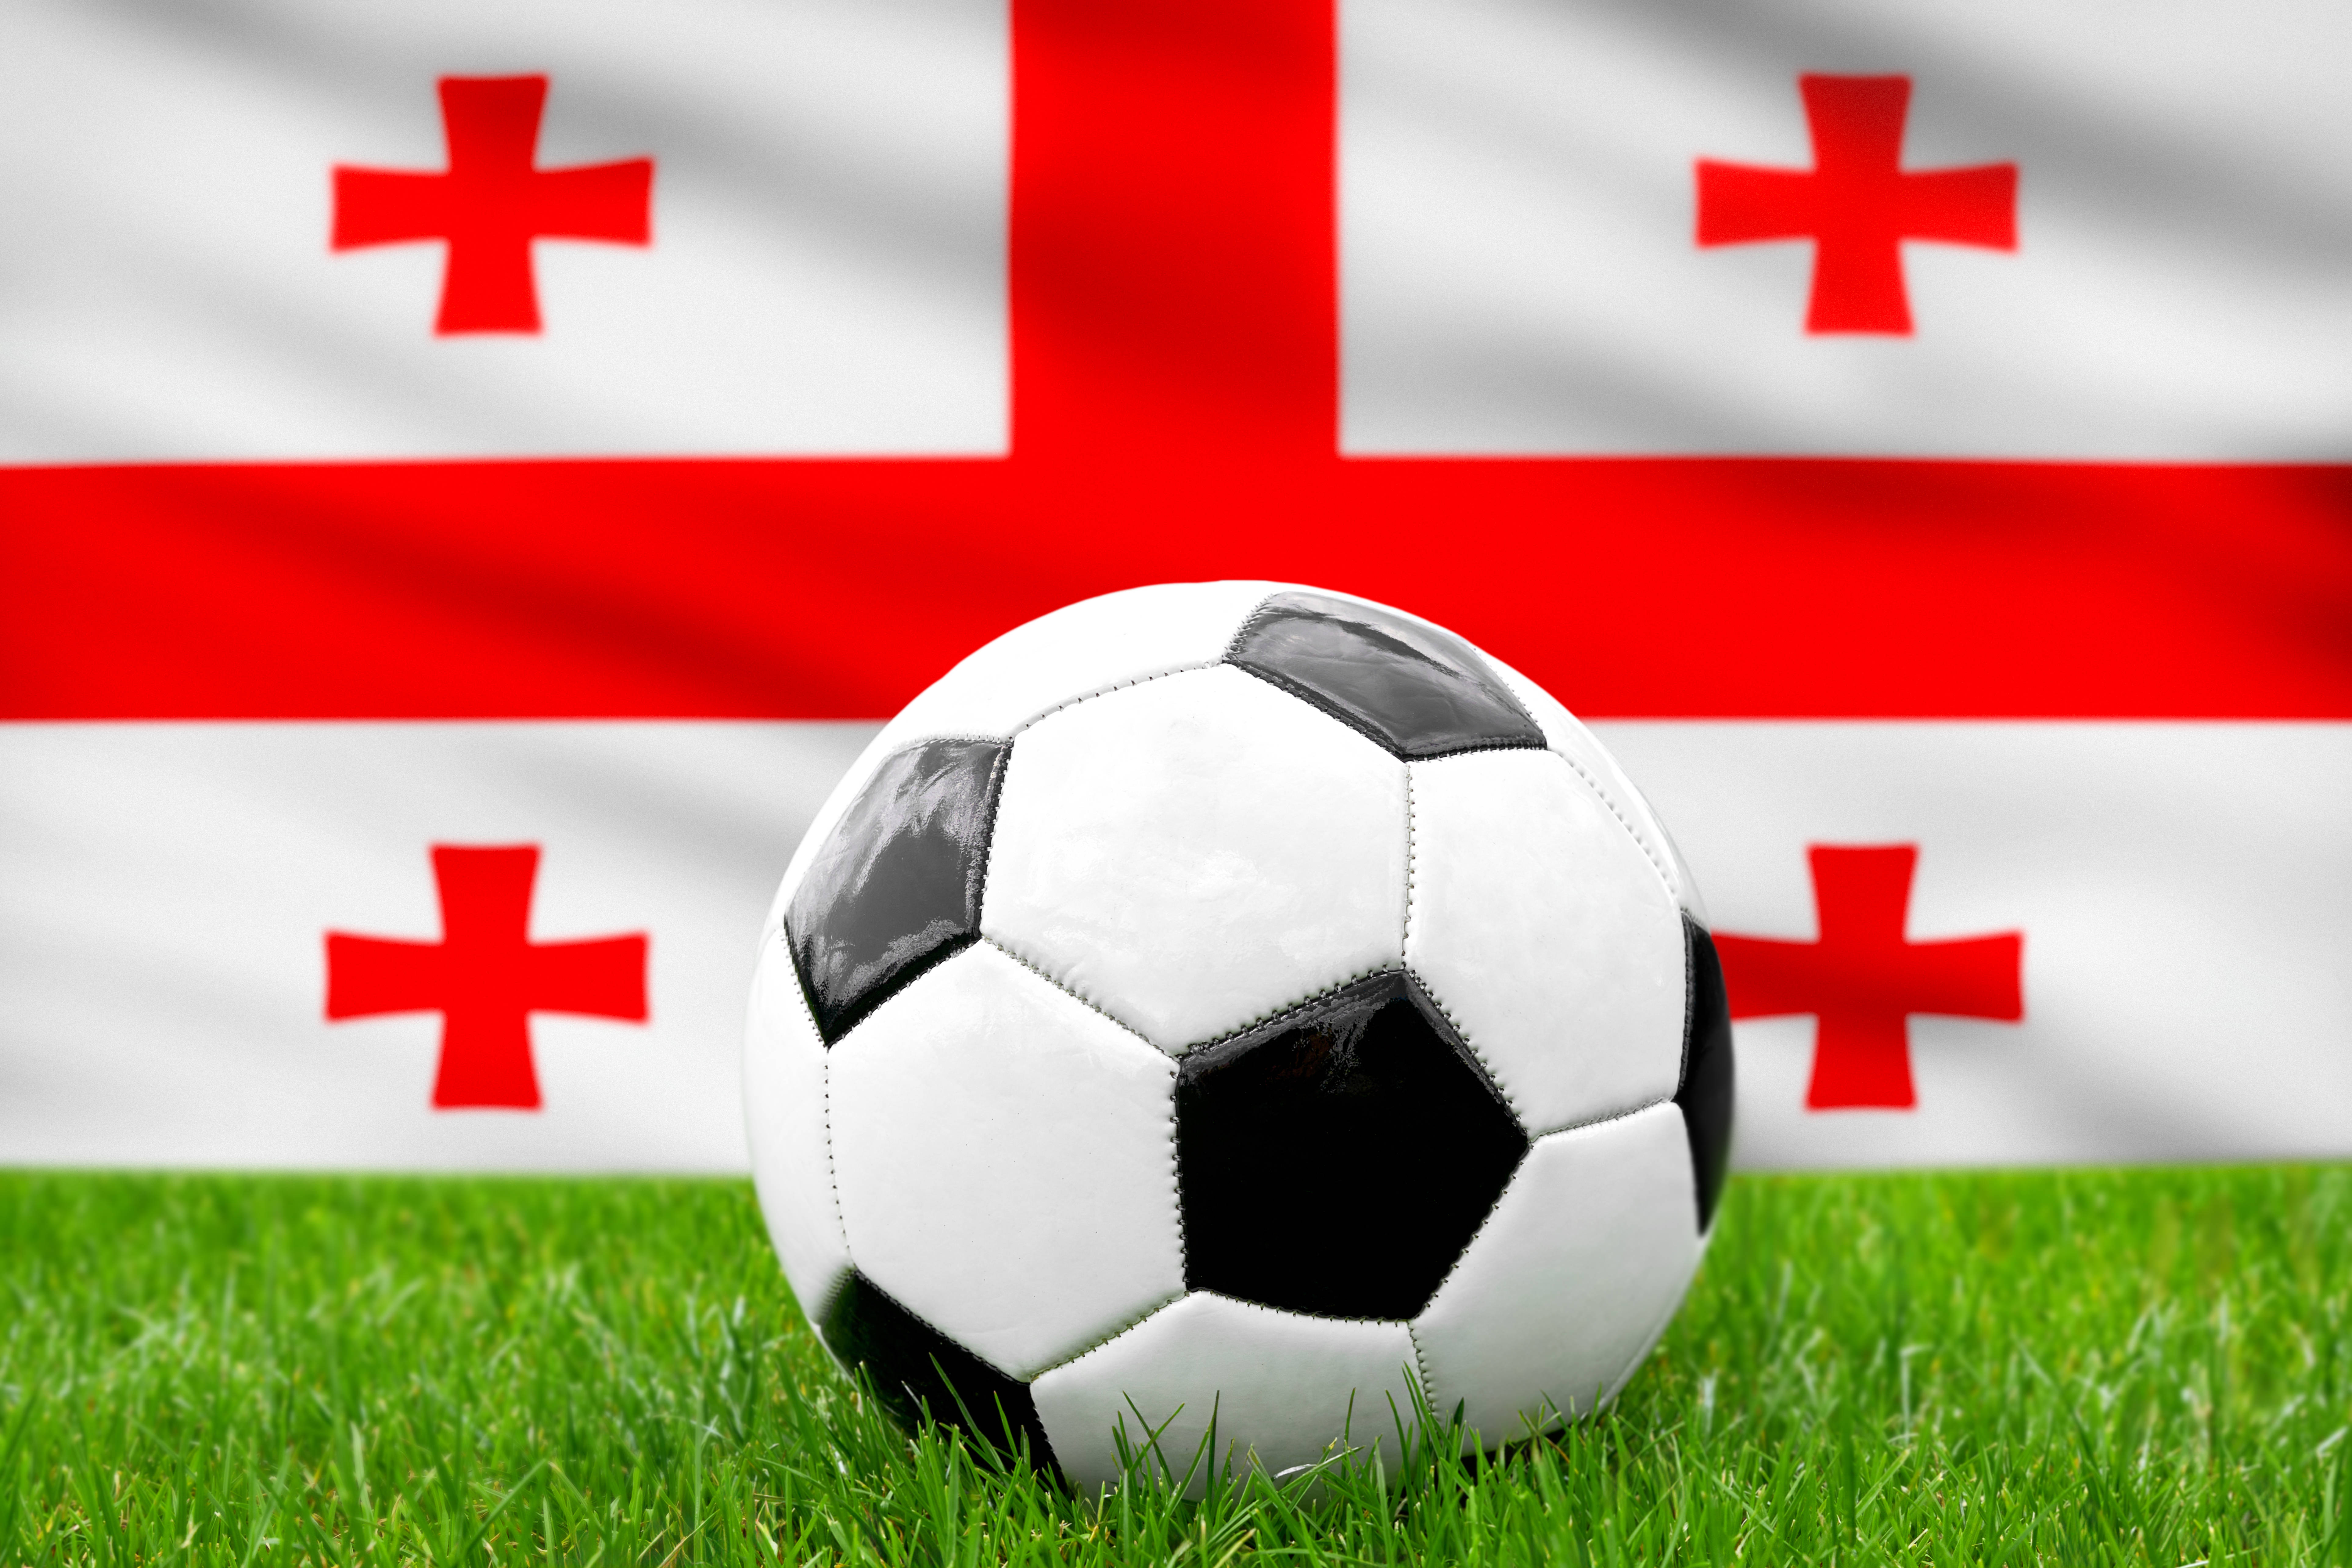 Image of the Georgian flag with a football in front of it